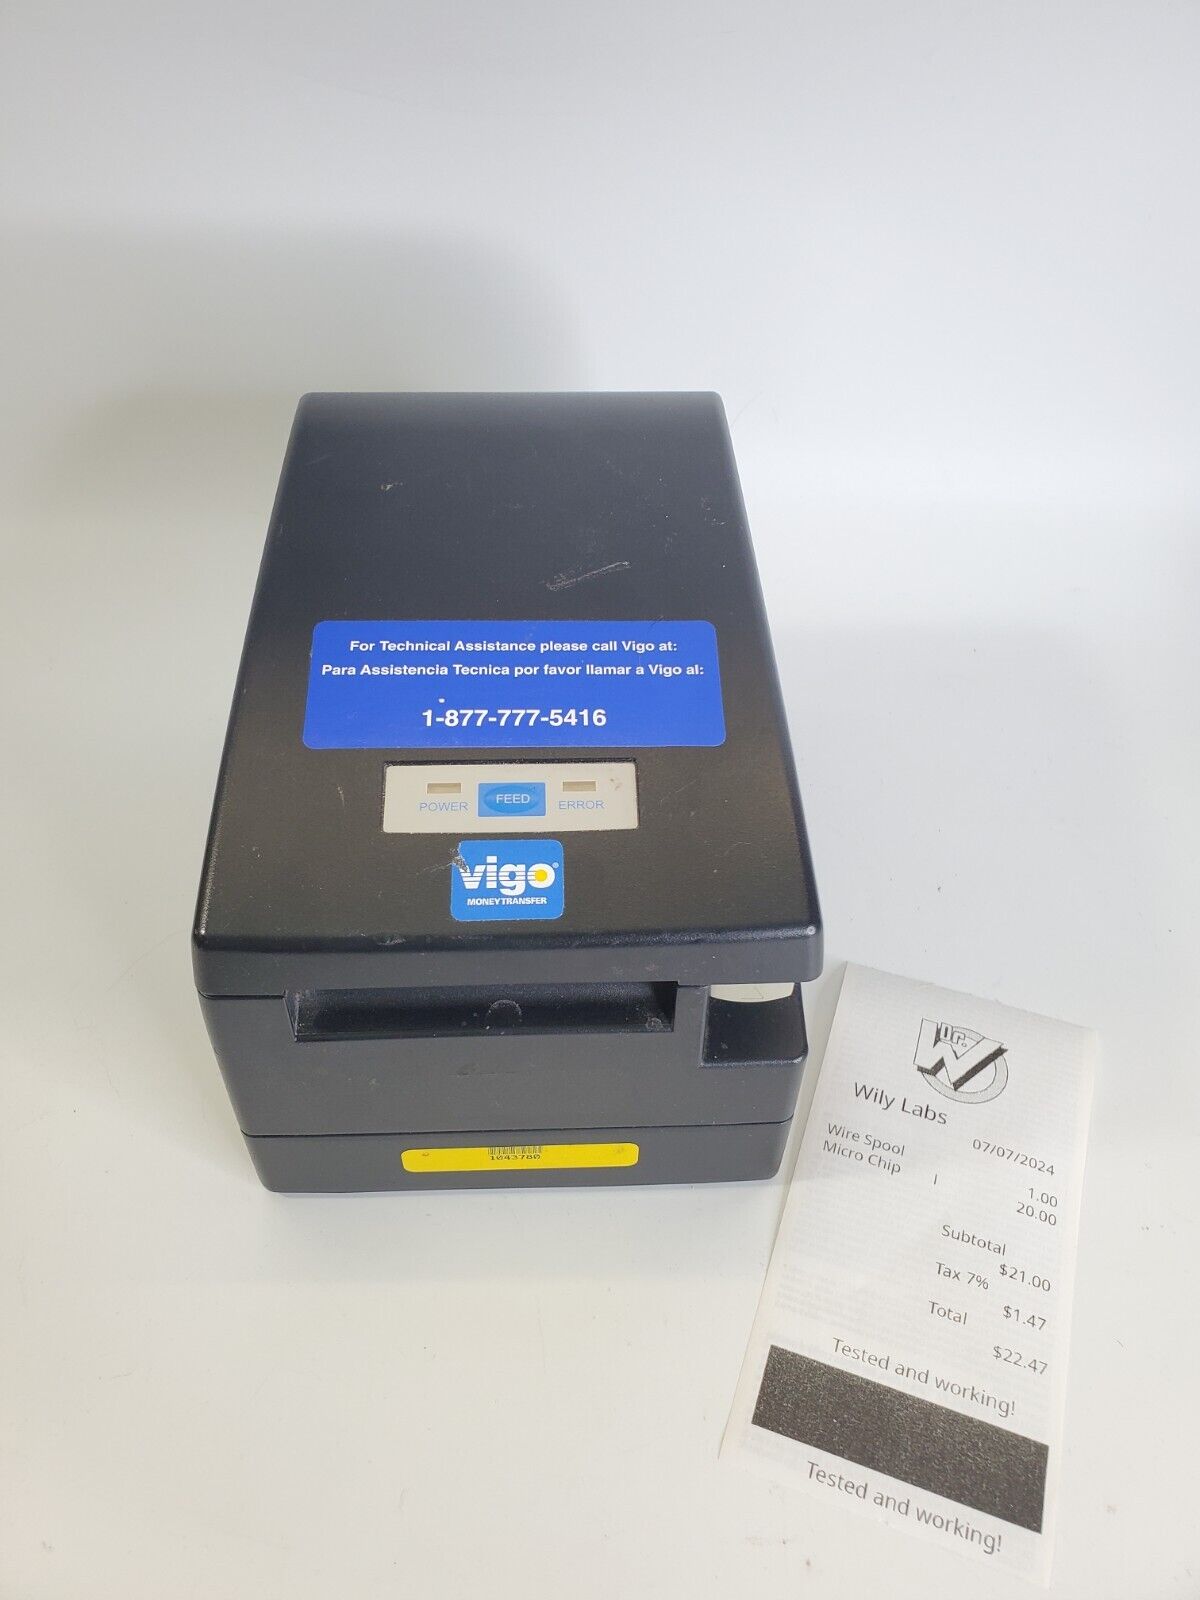 Citizen CT-S2000 Hi-Speed Receipt Direct Thermal POS Printer Tested Working